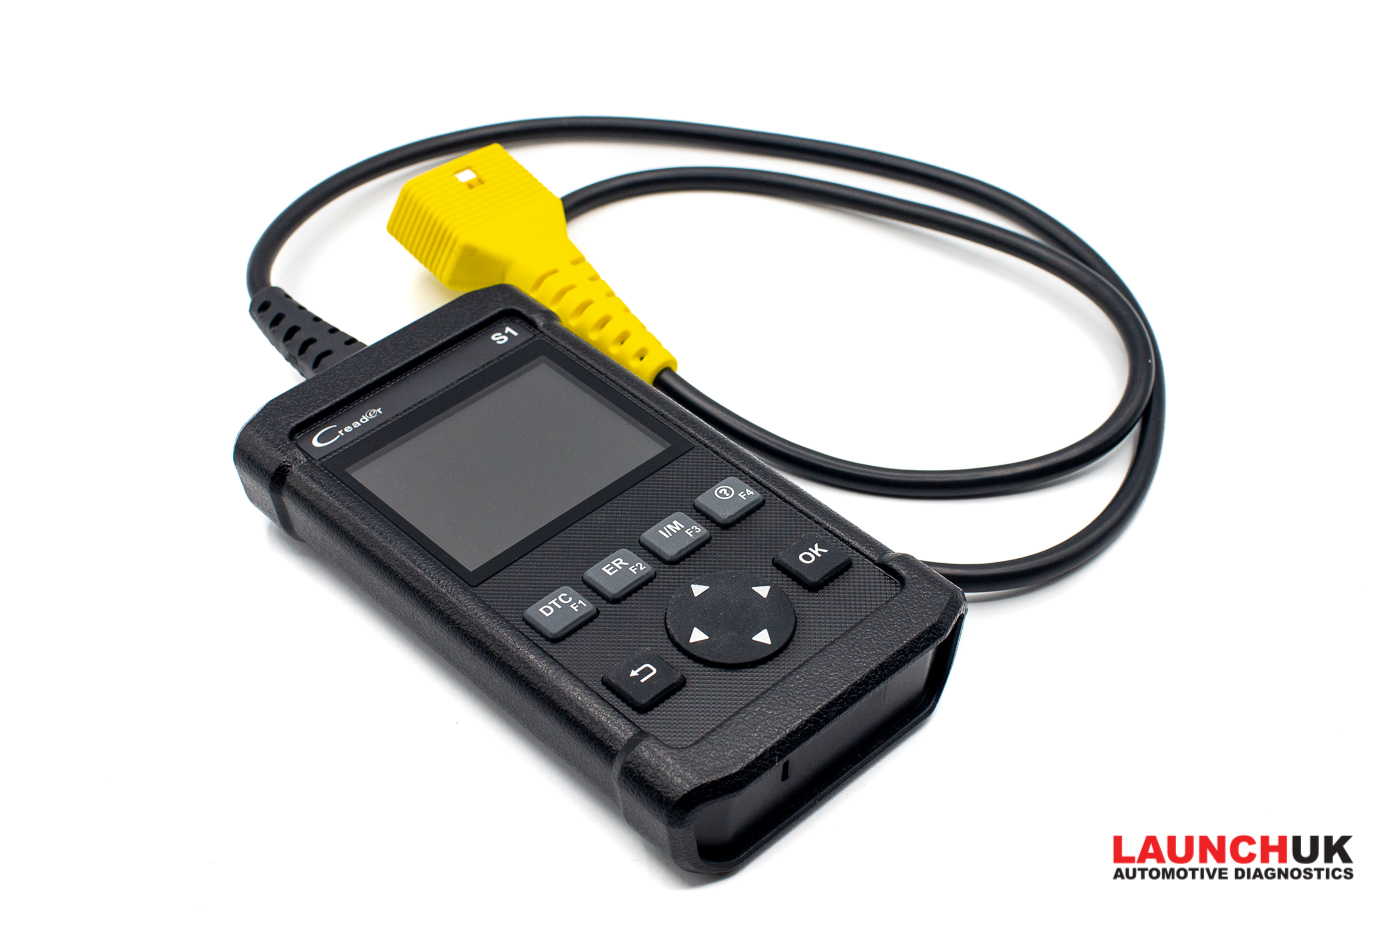 Launch’s entry-level OBD code reader